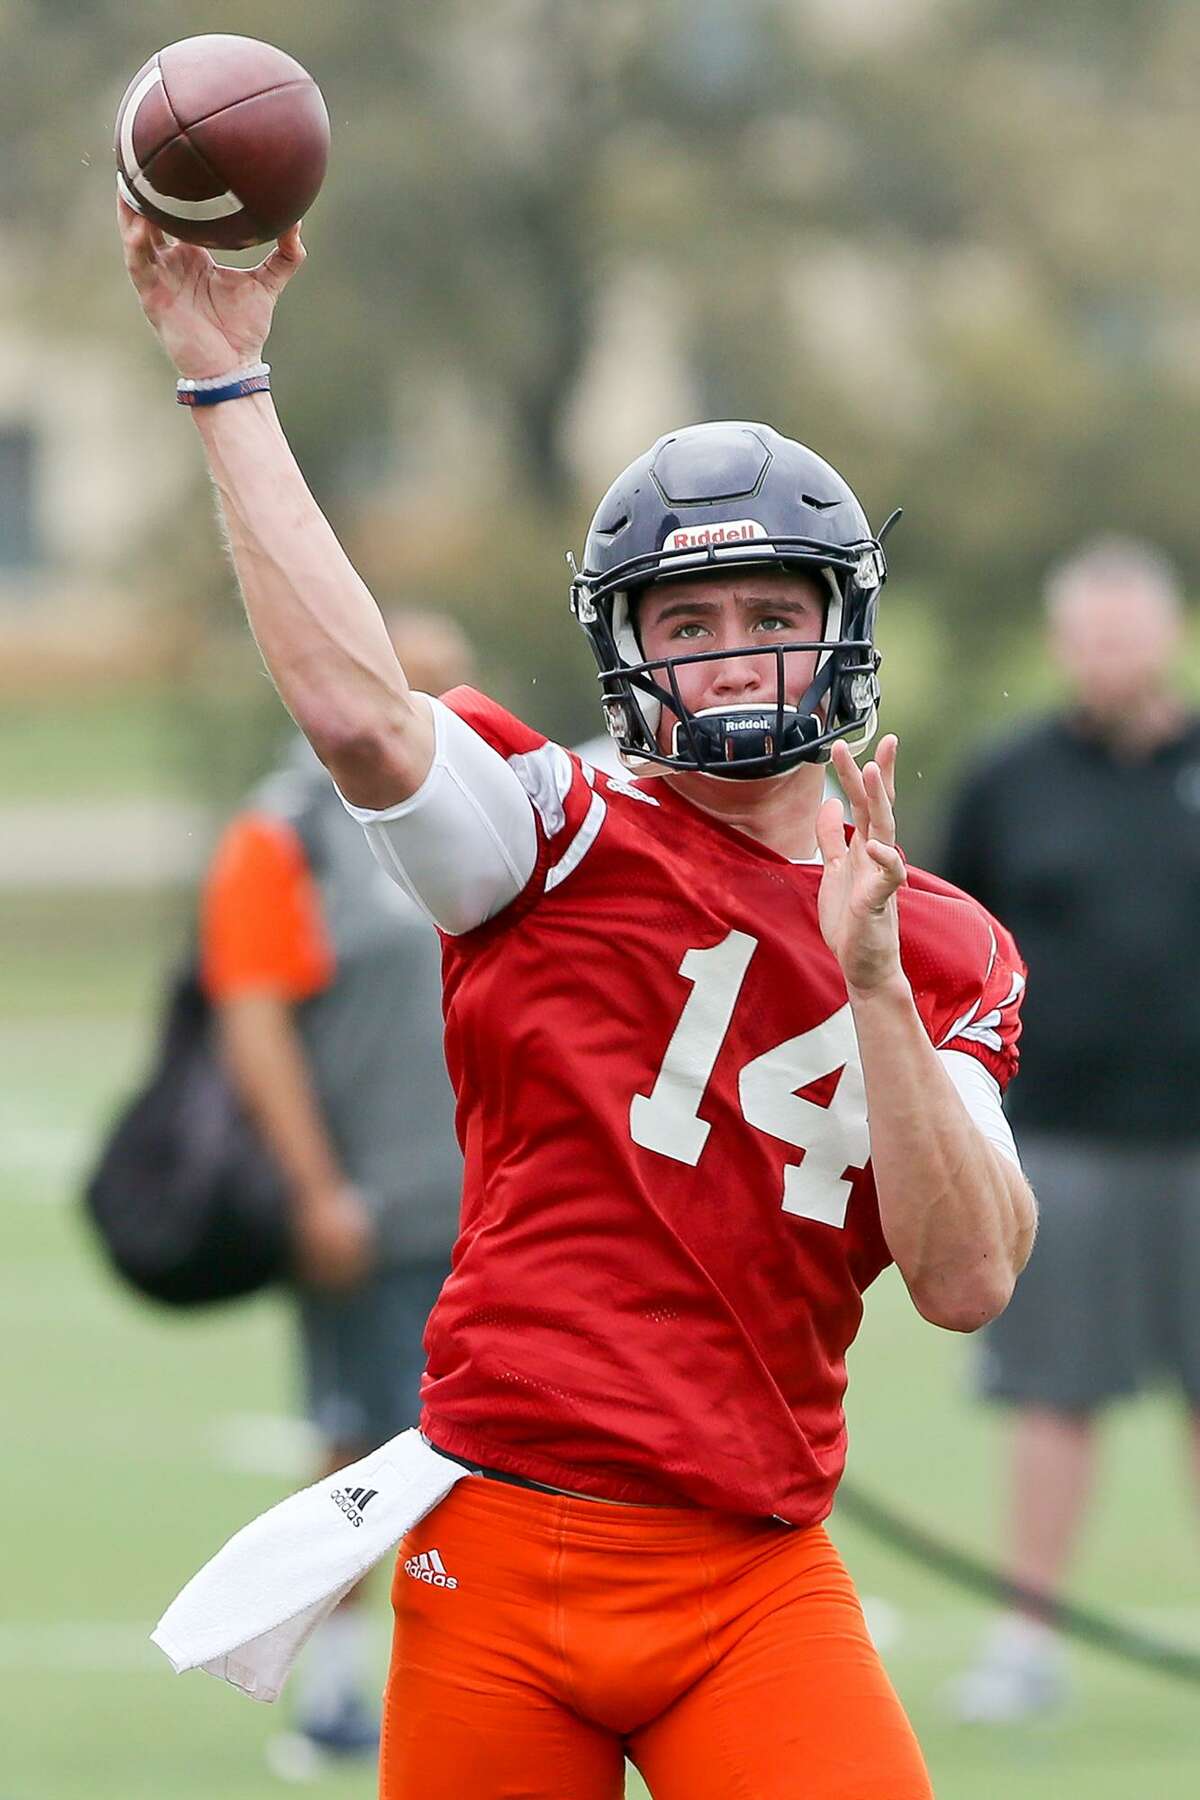 UTSA quarterback Dalton Sturm throws a pass during the opening day of spring practice on Monday, March 6, 2017. MARVIN PFEIFFER/ mpfeiffer@express-news.net